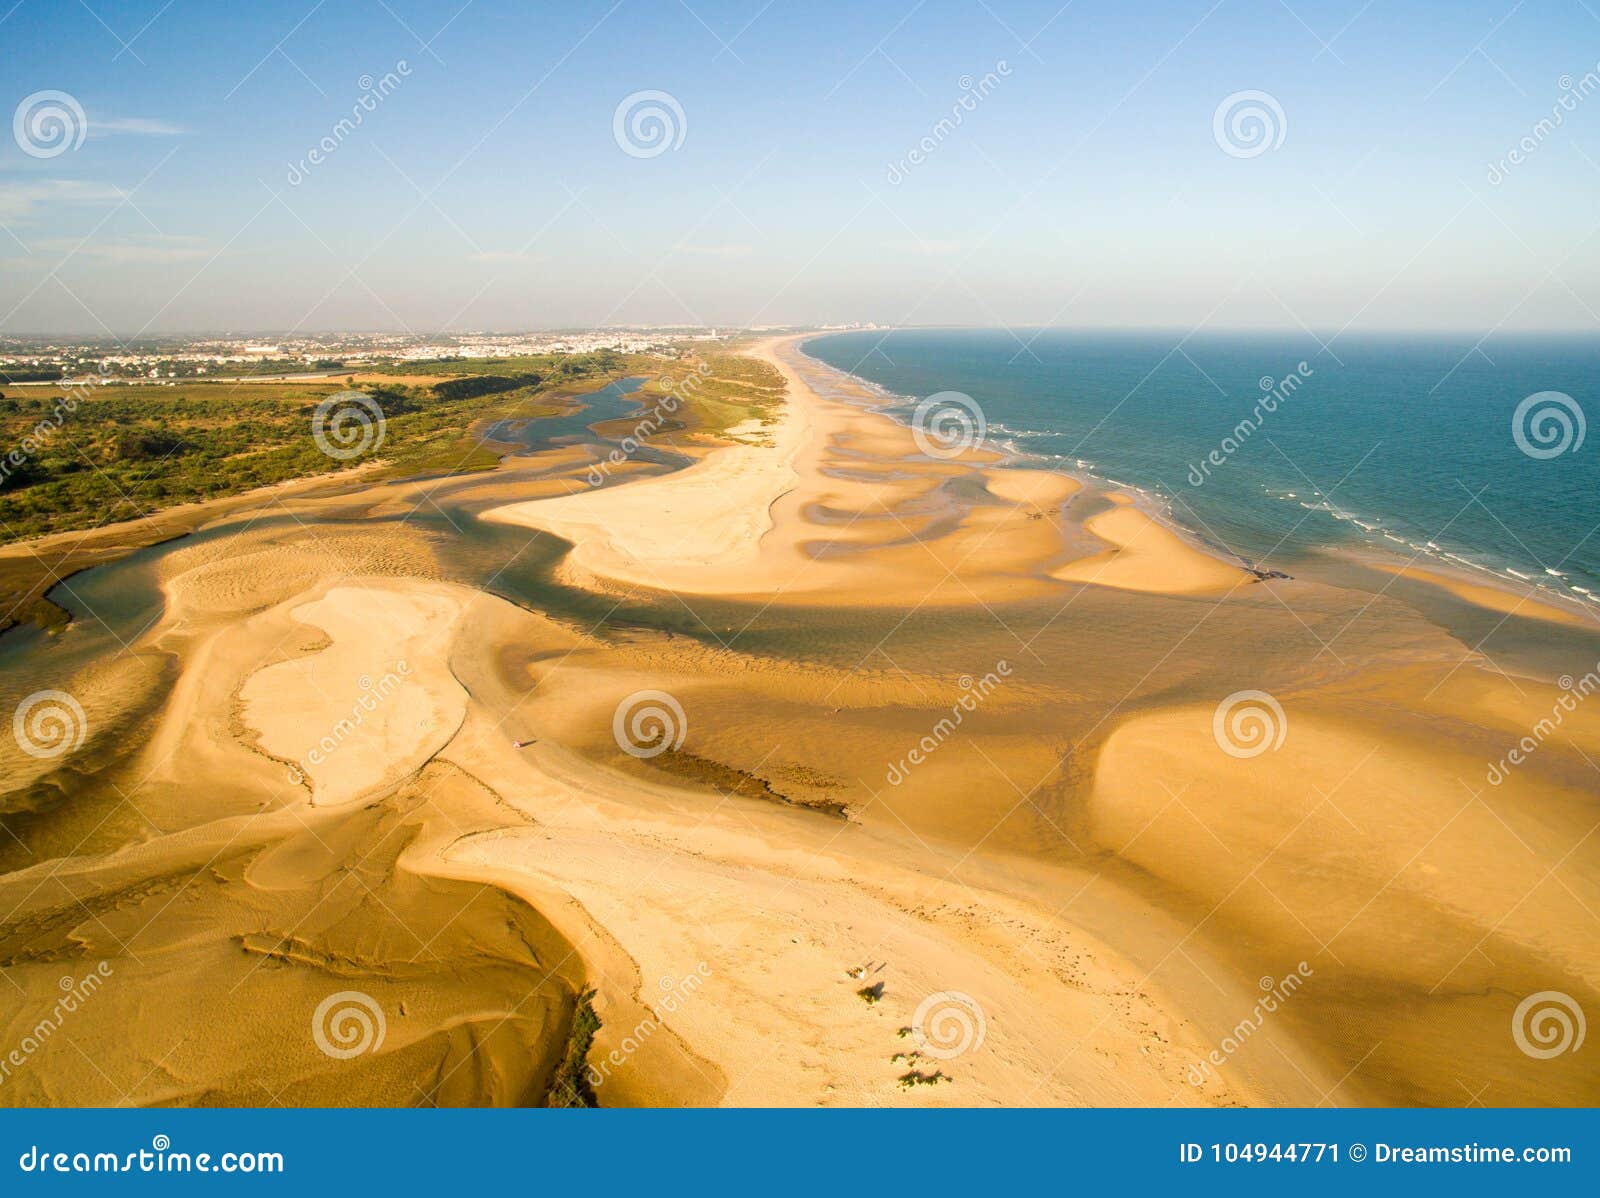 aerial view from the ria formosa river and sea